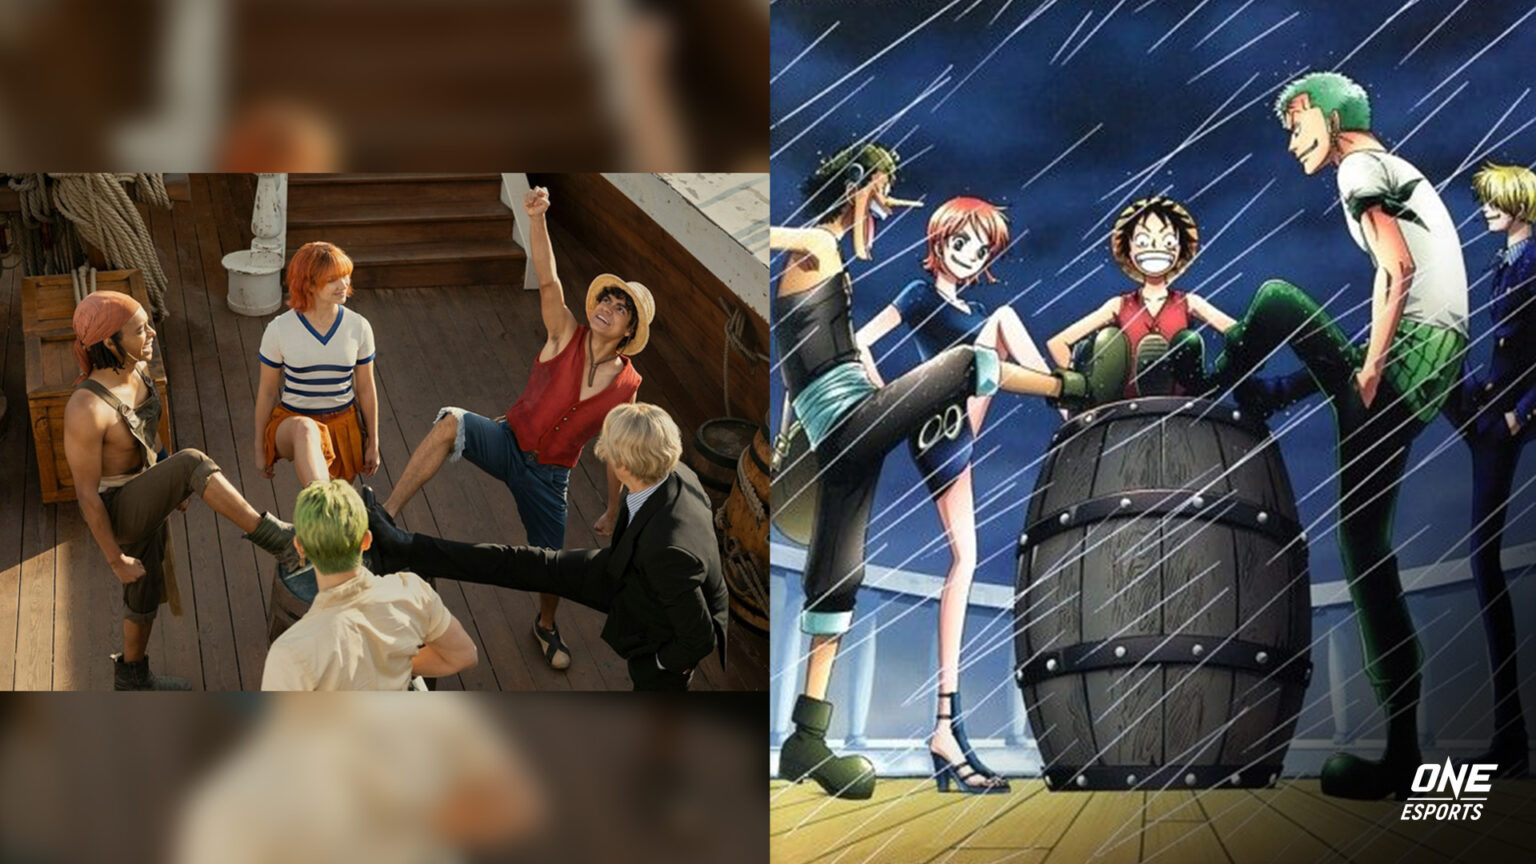 One Piece live action versus anime ending: 3 key differences | ONE Esports